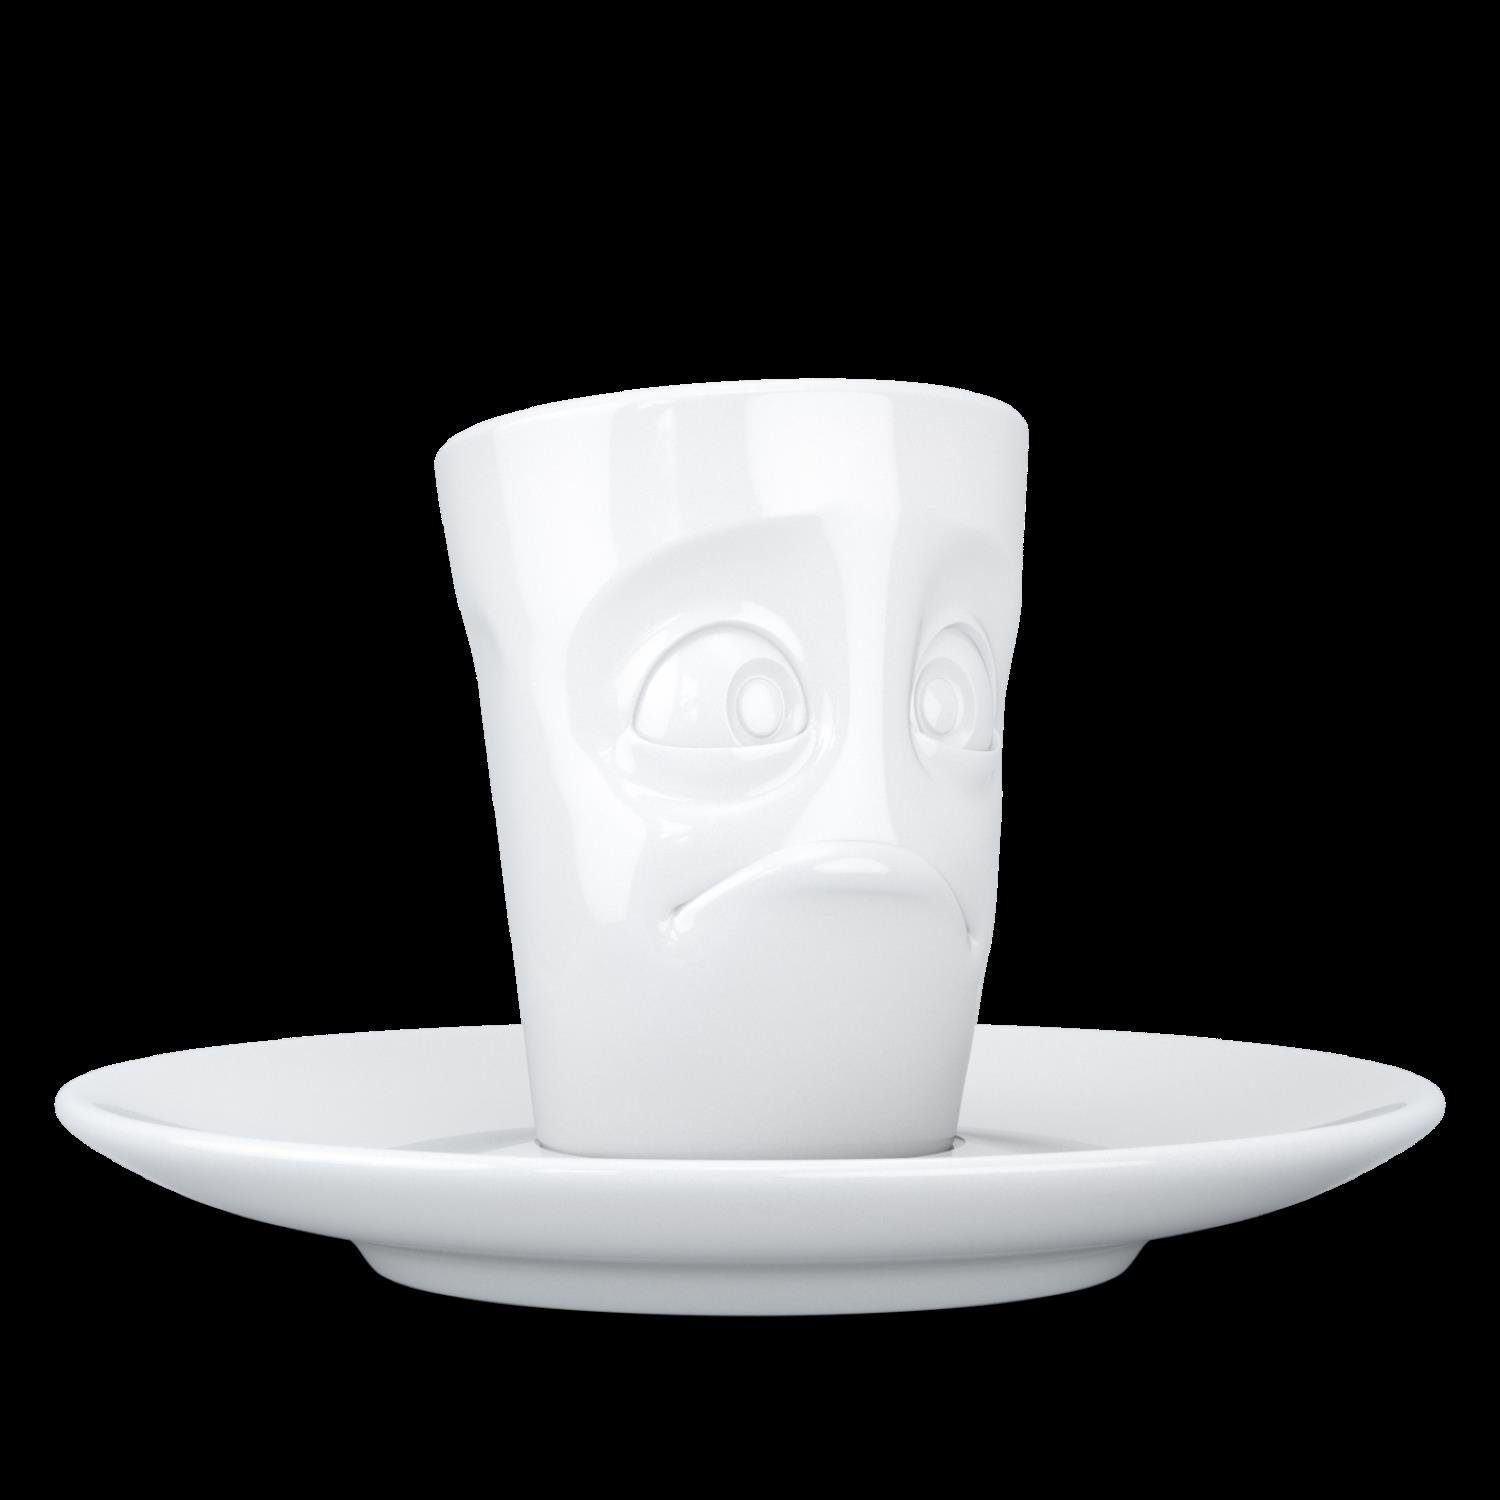 Henkel FIFTYEIGHT Espresso Fiftyeight mit Mug Products PRODUCTS - Tasse